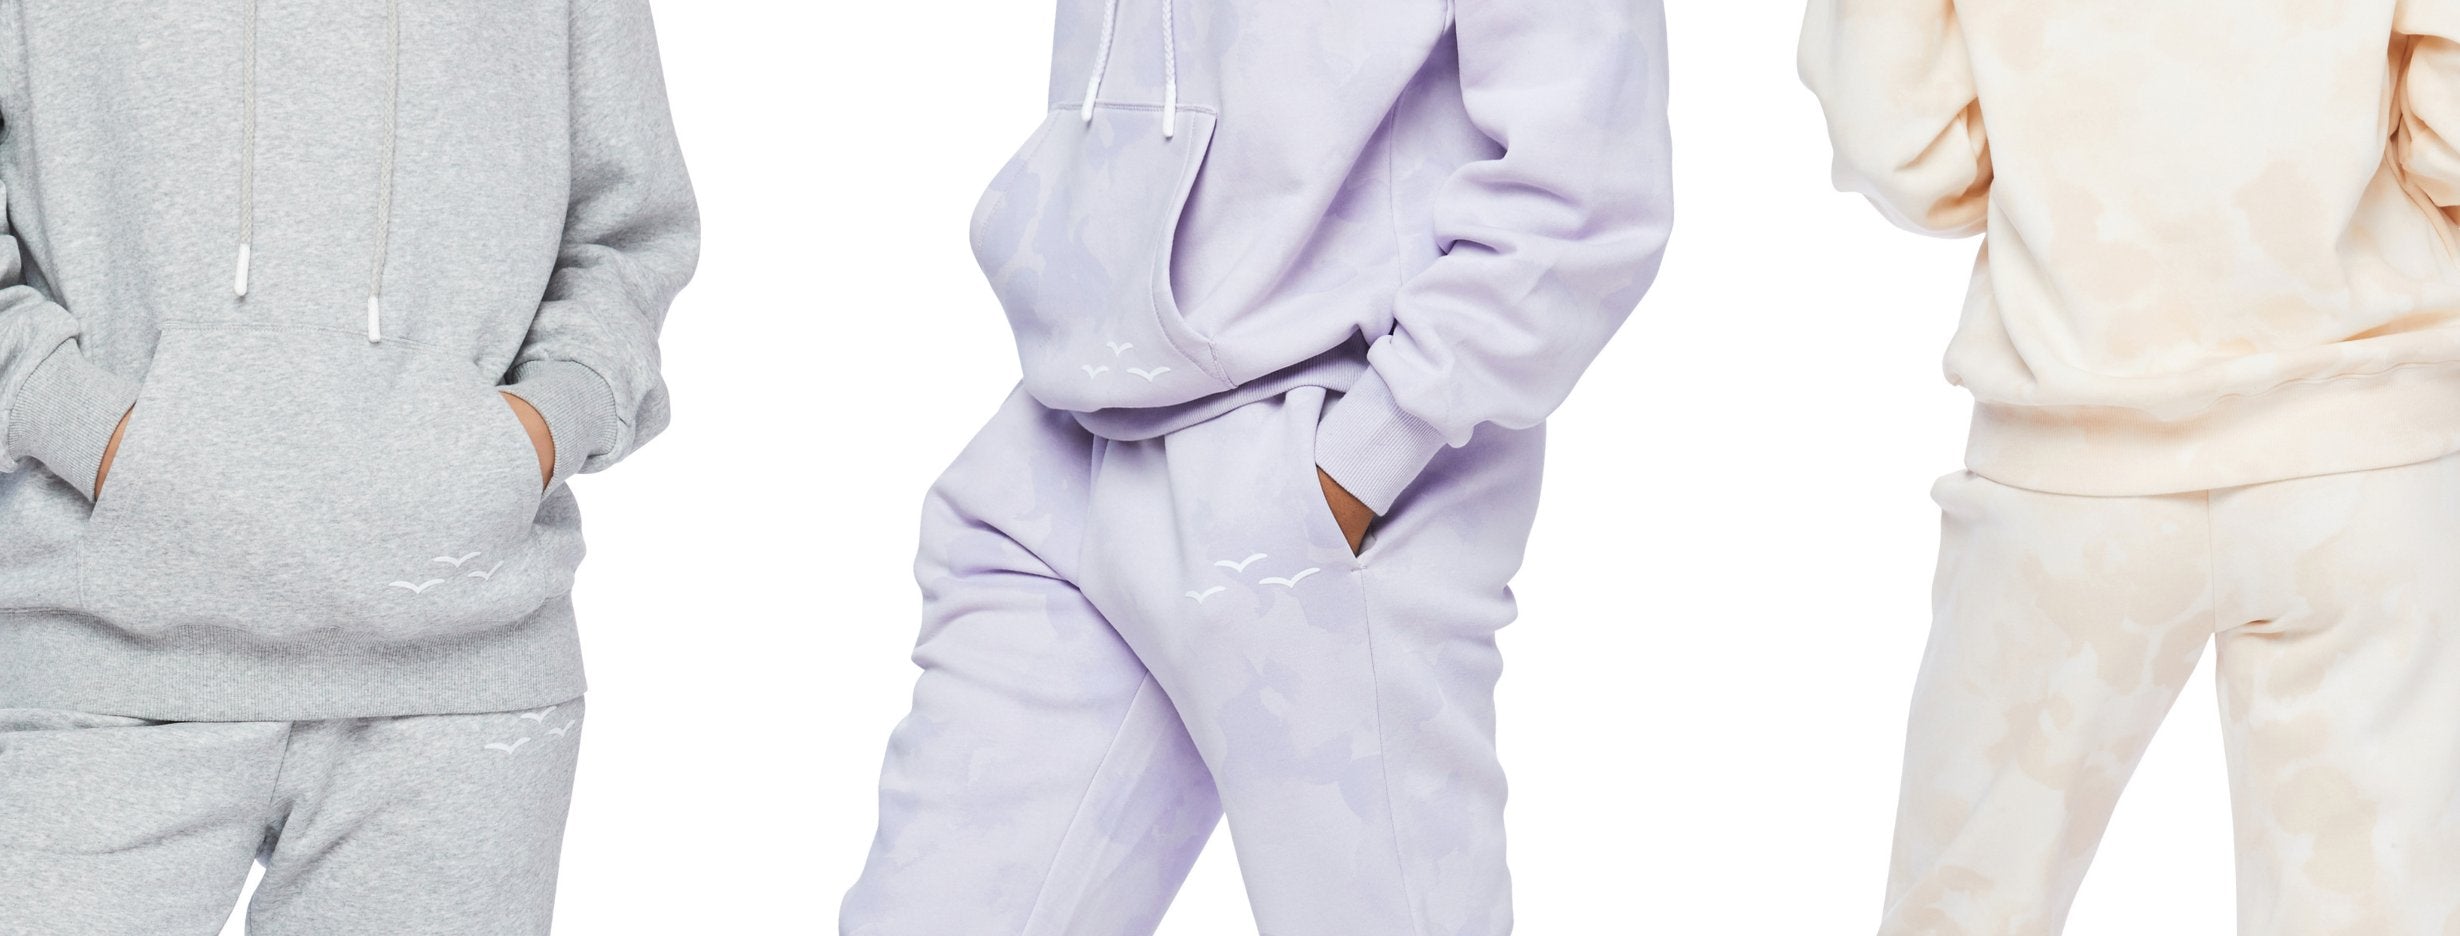  Sweatsuits - Sets: Clothing, Shoes & Accessories